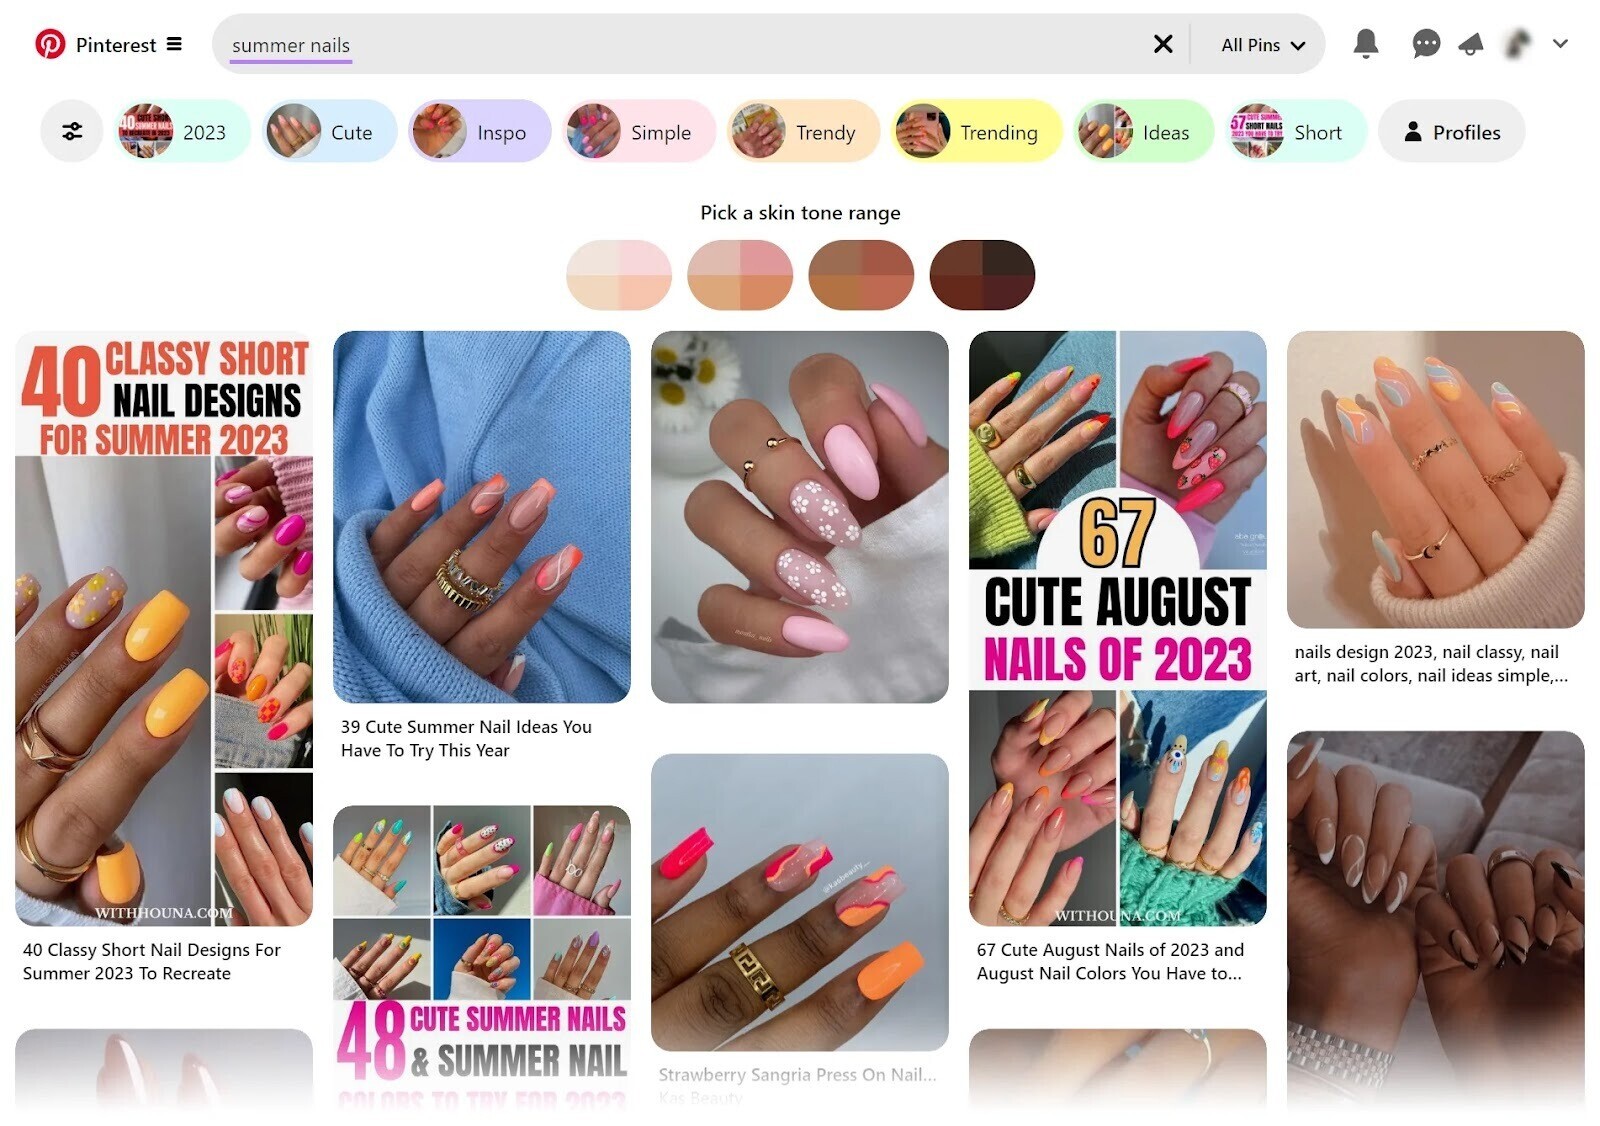 Pinterest search results for “summer nails”